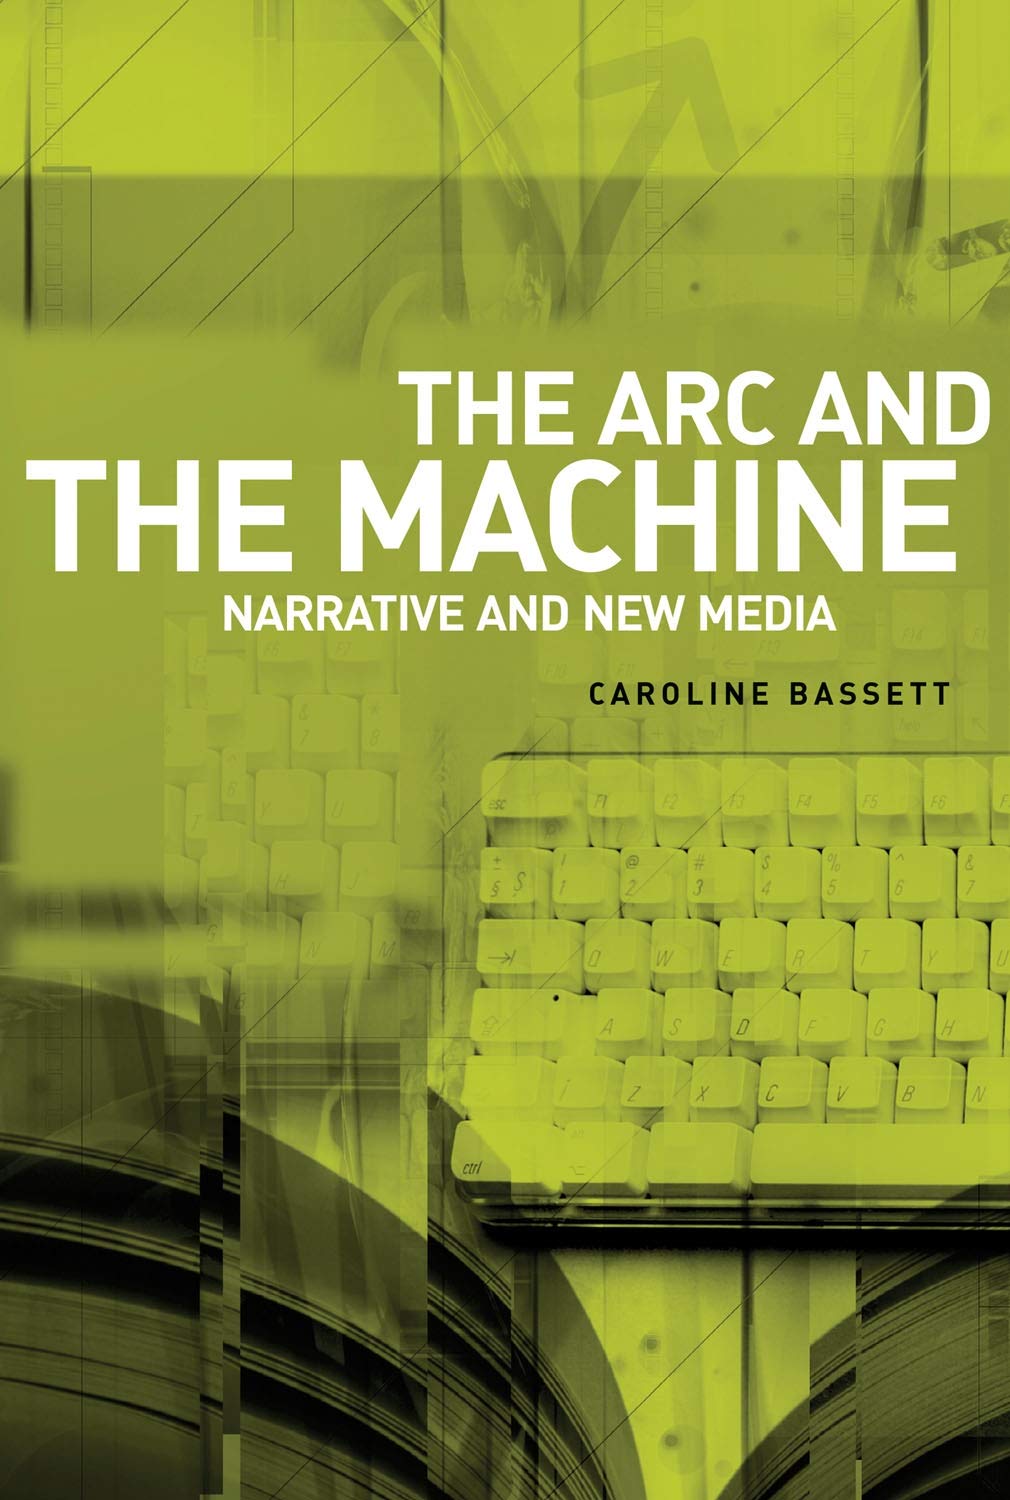 The Arc and the Machine: Narrative and New Media